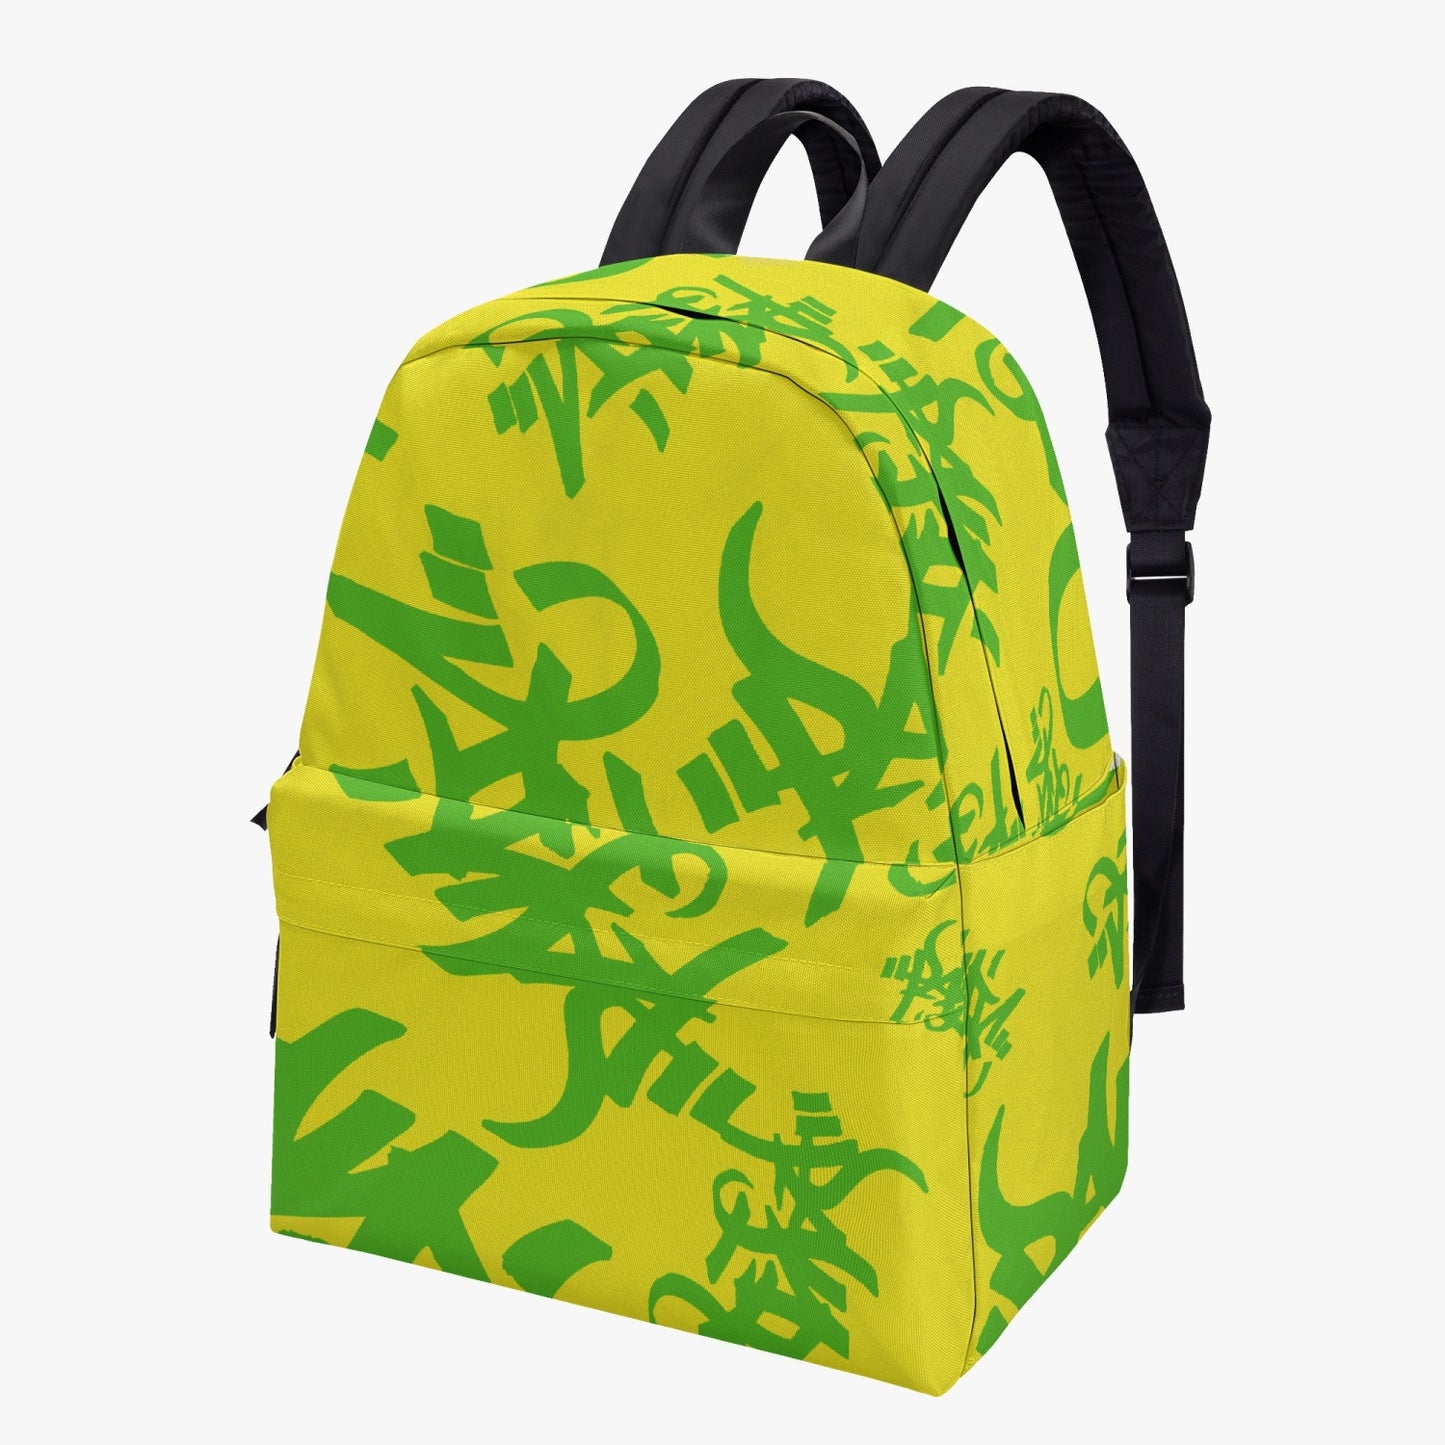 THE TAG YELLOW & GREEN CANVAS BACKPACK - Panic 39